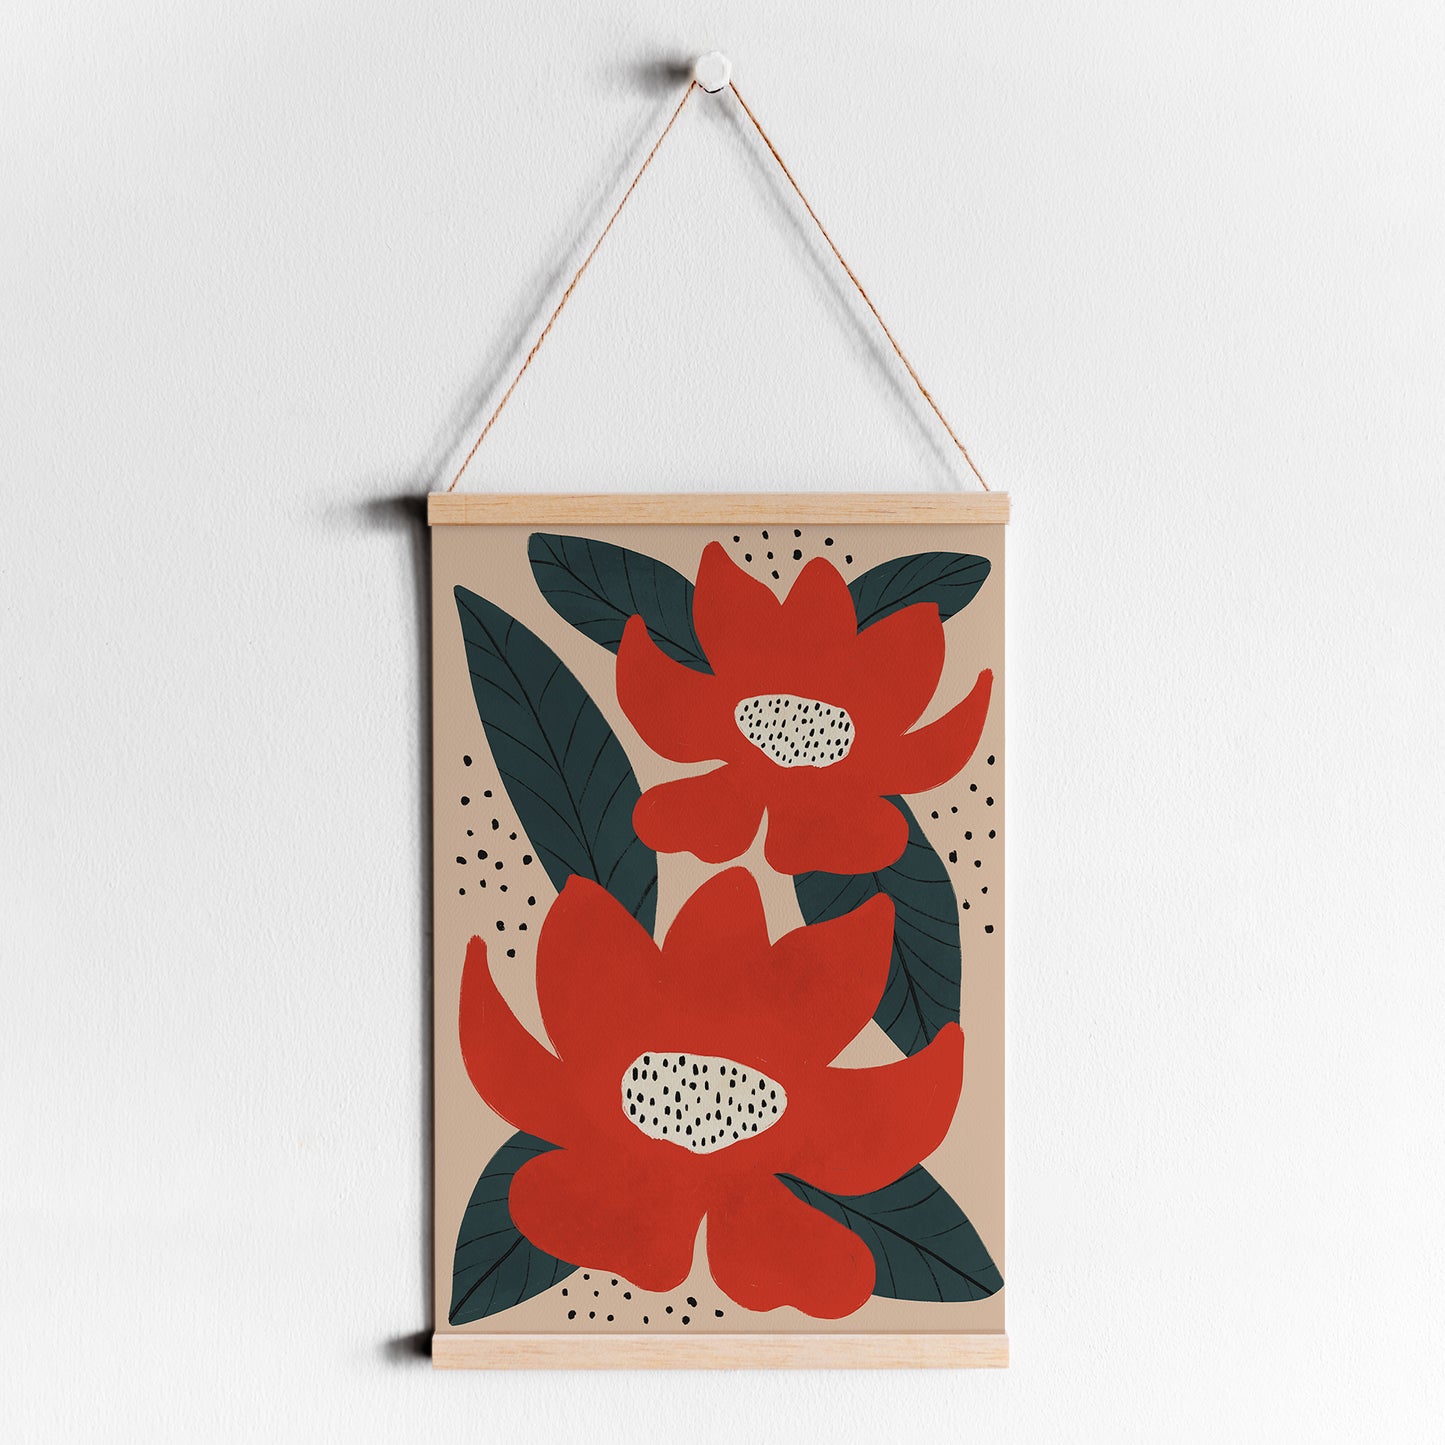 Retro Red Flowers Poster